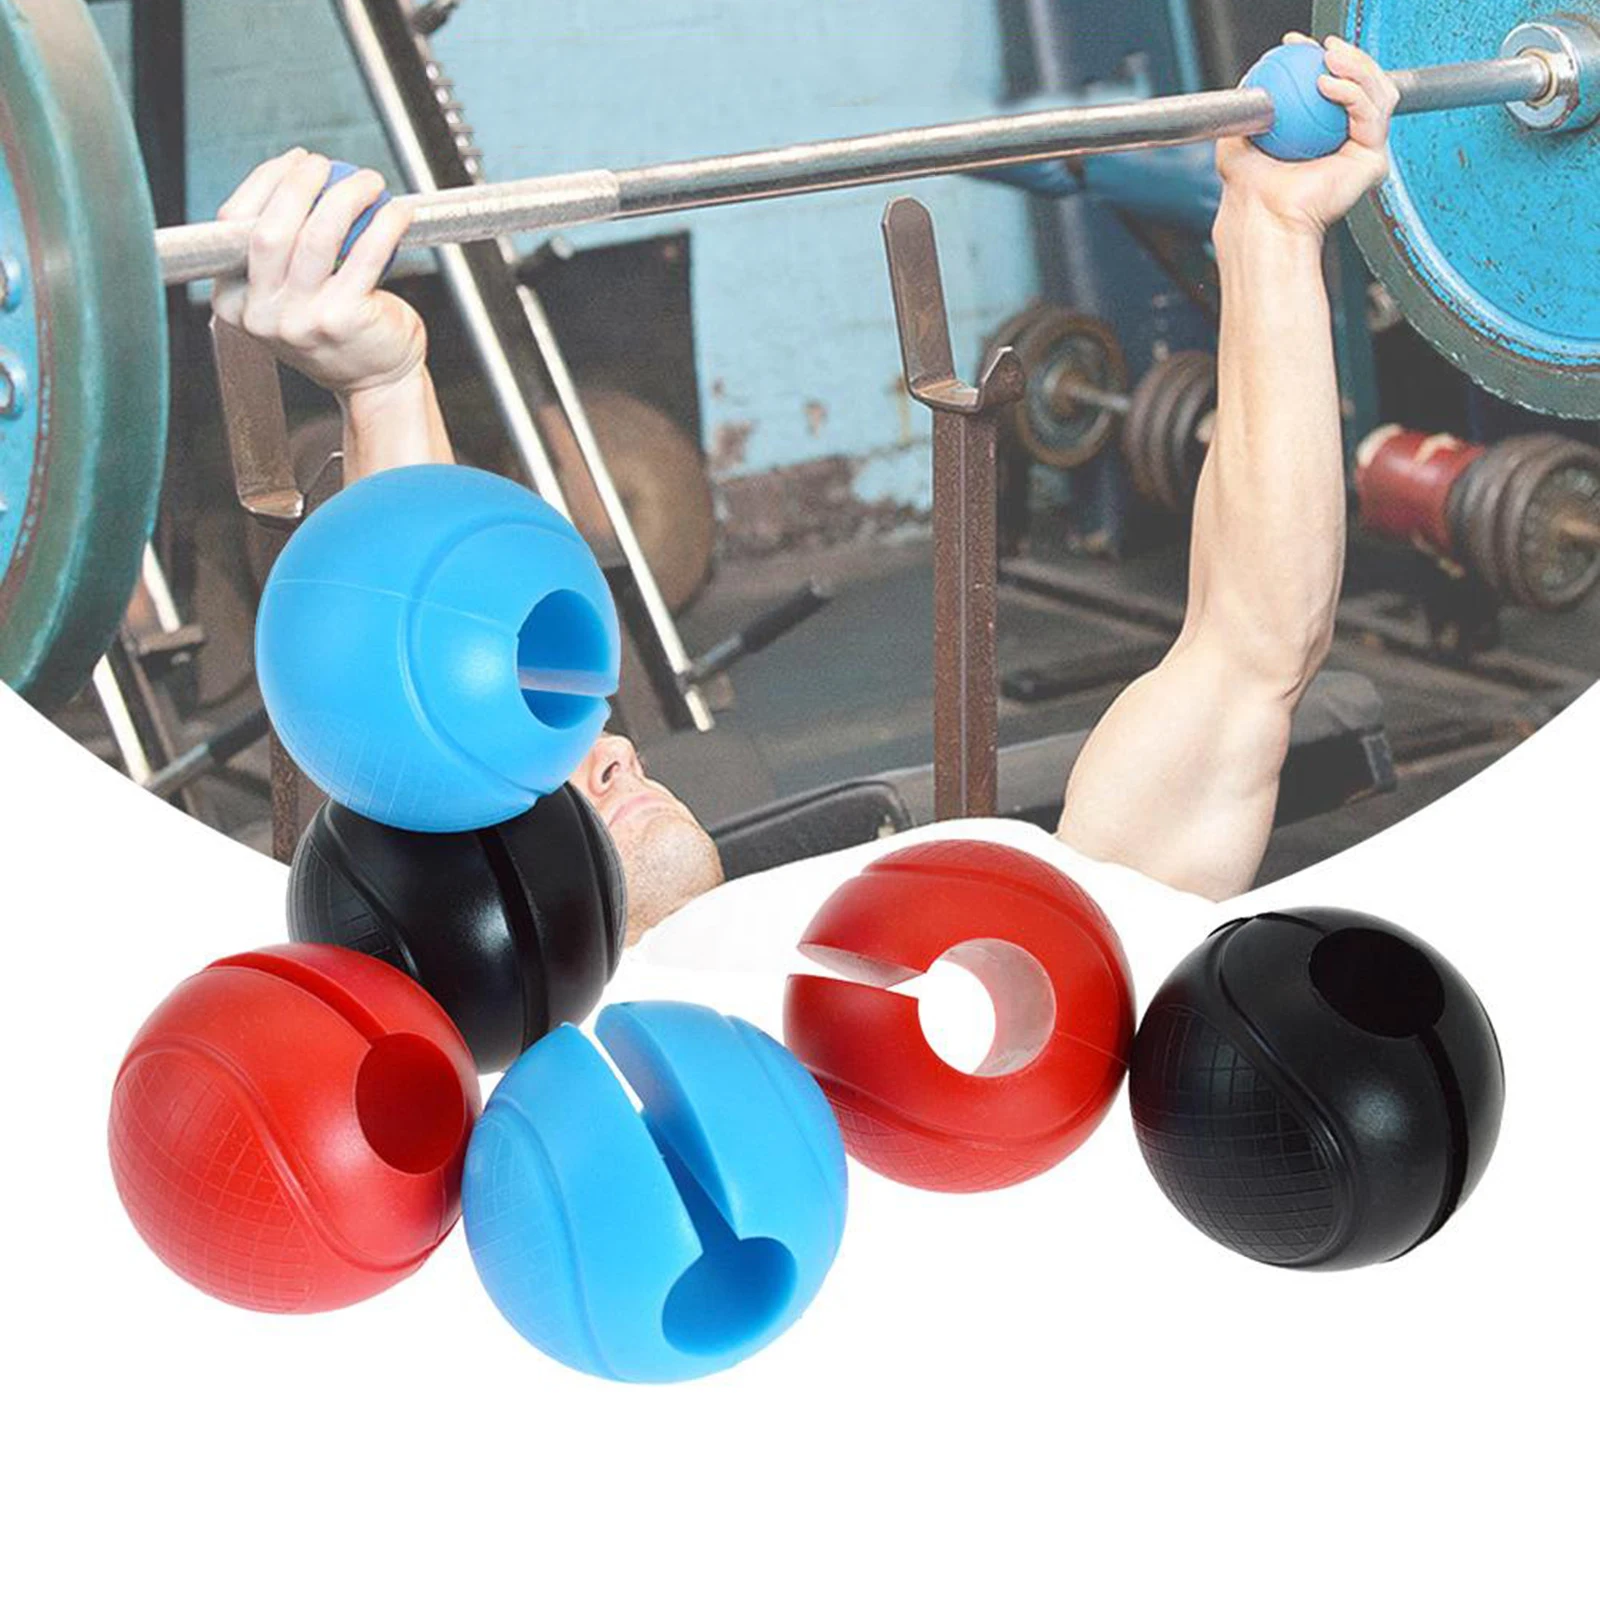 

2x Gym Bar Grips for Barbell Bars Dumbbell Handles Workouts Body Exercise Grip for Weightlifting Fitness Training Bodybuilding